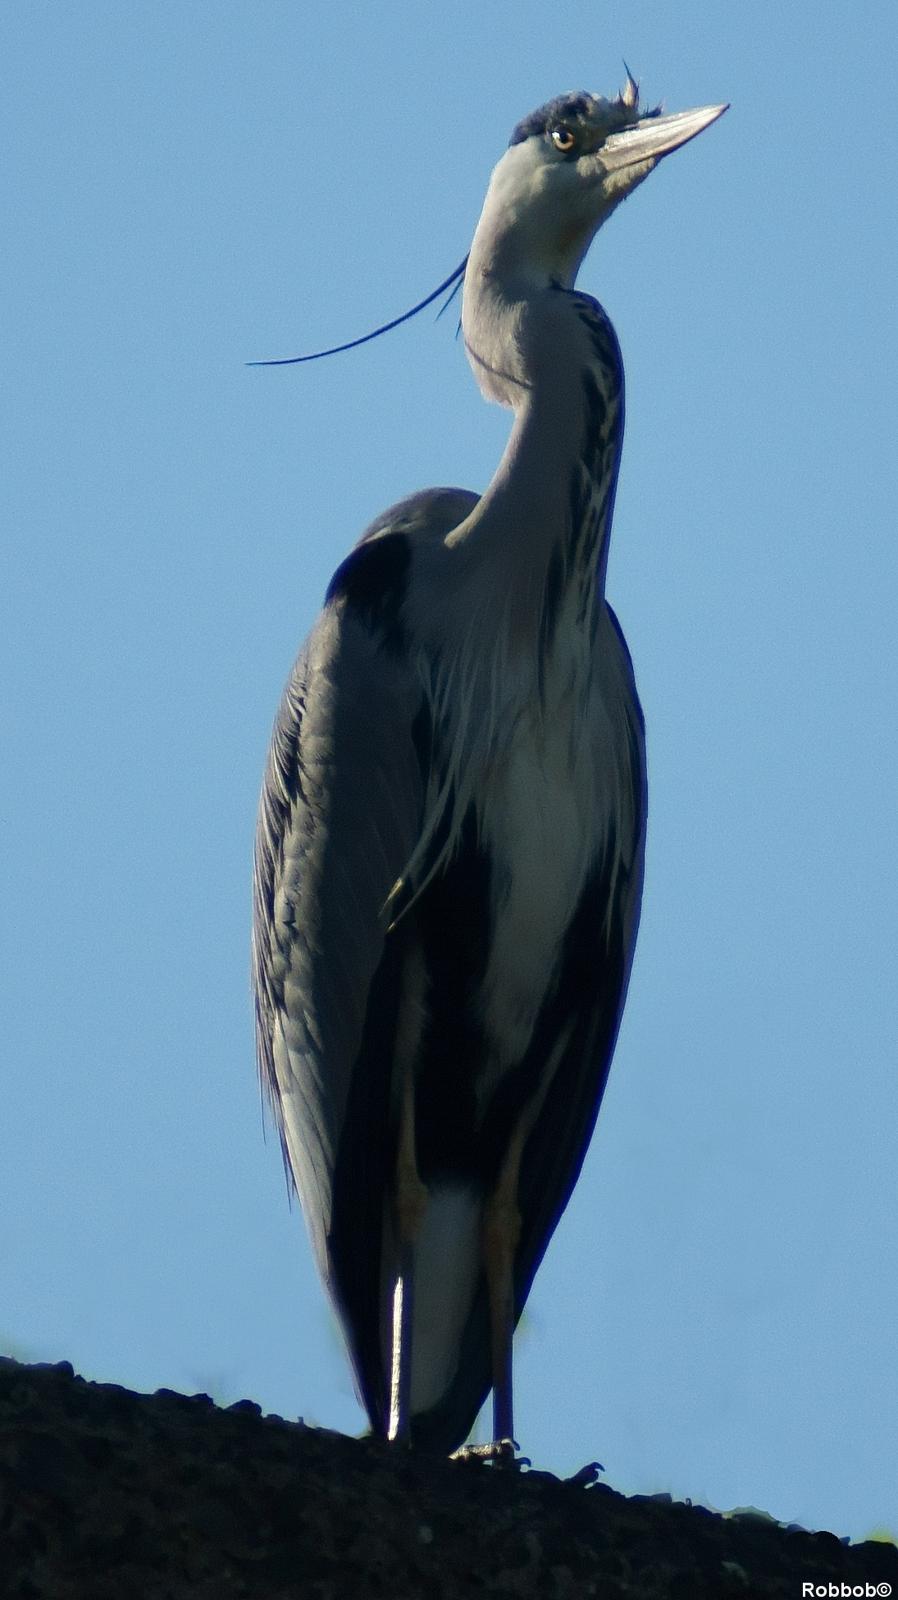 Regular Star contributor Robbob sent in this lovely picture of a grey heron at Pocket Nook, St Helens.